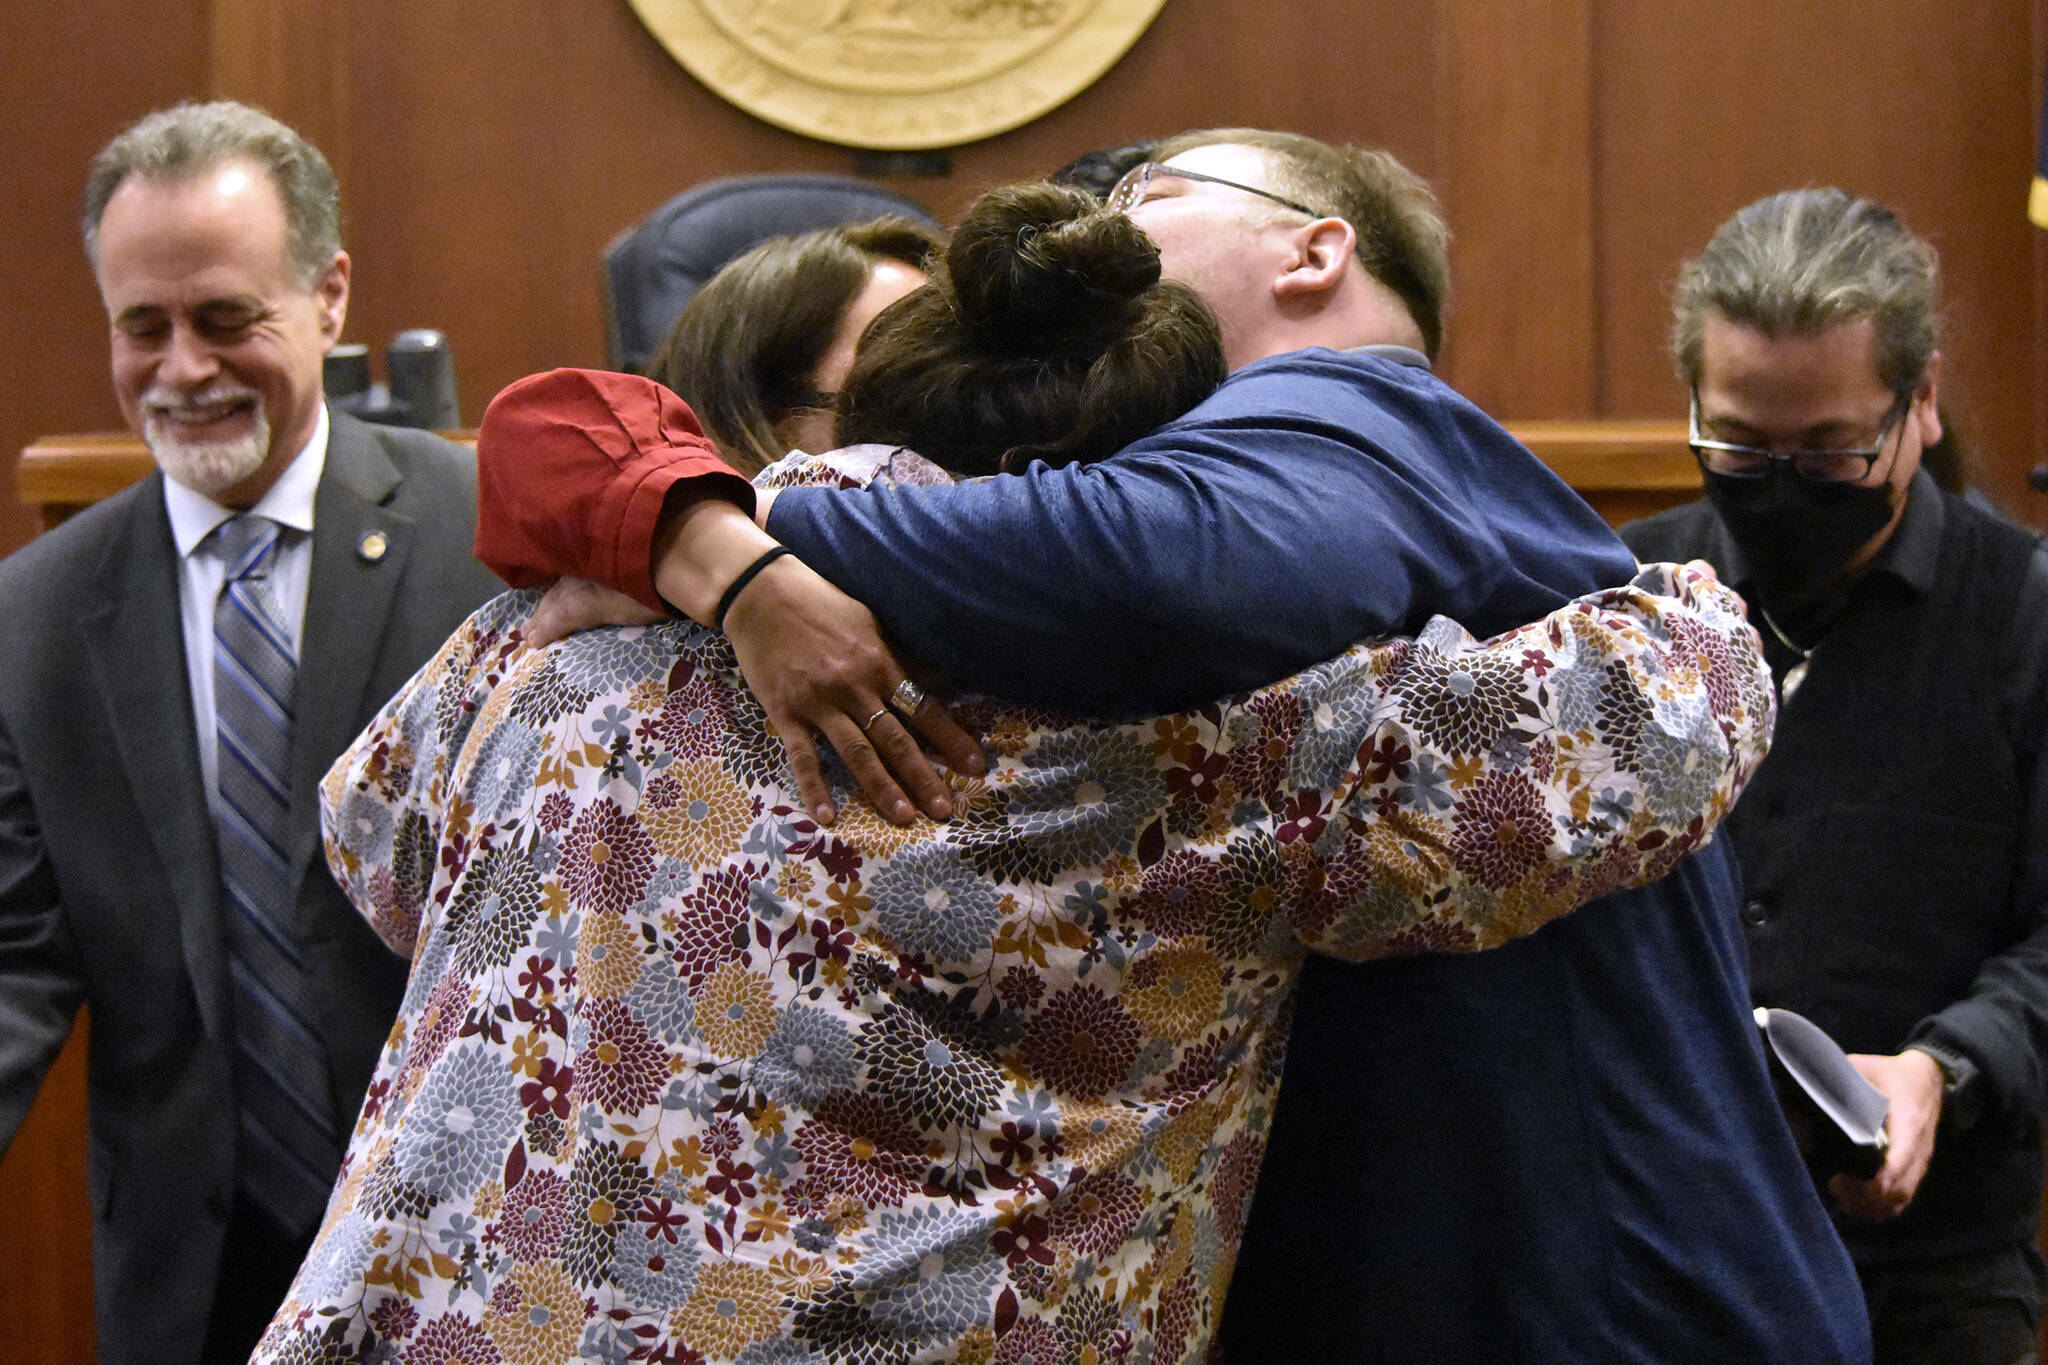 Alaskans for Better Government members La quen náay Liz Medicine Crow, Richard Chalyee Éesh Peterson and ‘Wáahlaal Gidáak Barbara Blake embrace on the floor of the Alaska State Senate on Friday, May 13, 2022, following the passage of House Bill 123, a bill to formally recognize the state's 229 already federally-recognized tribes. Gov. Mike Dunleavy is scheduled to sign the bill during a ceremony Thursday during a ceremony in Anchorage. (Peter Segall / Juneau Empire)